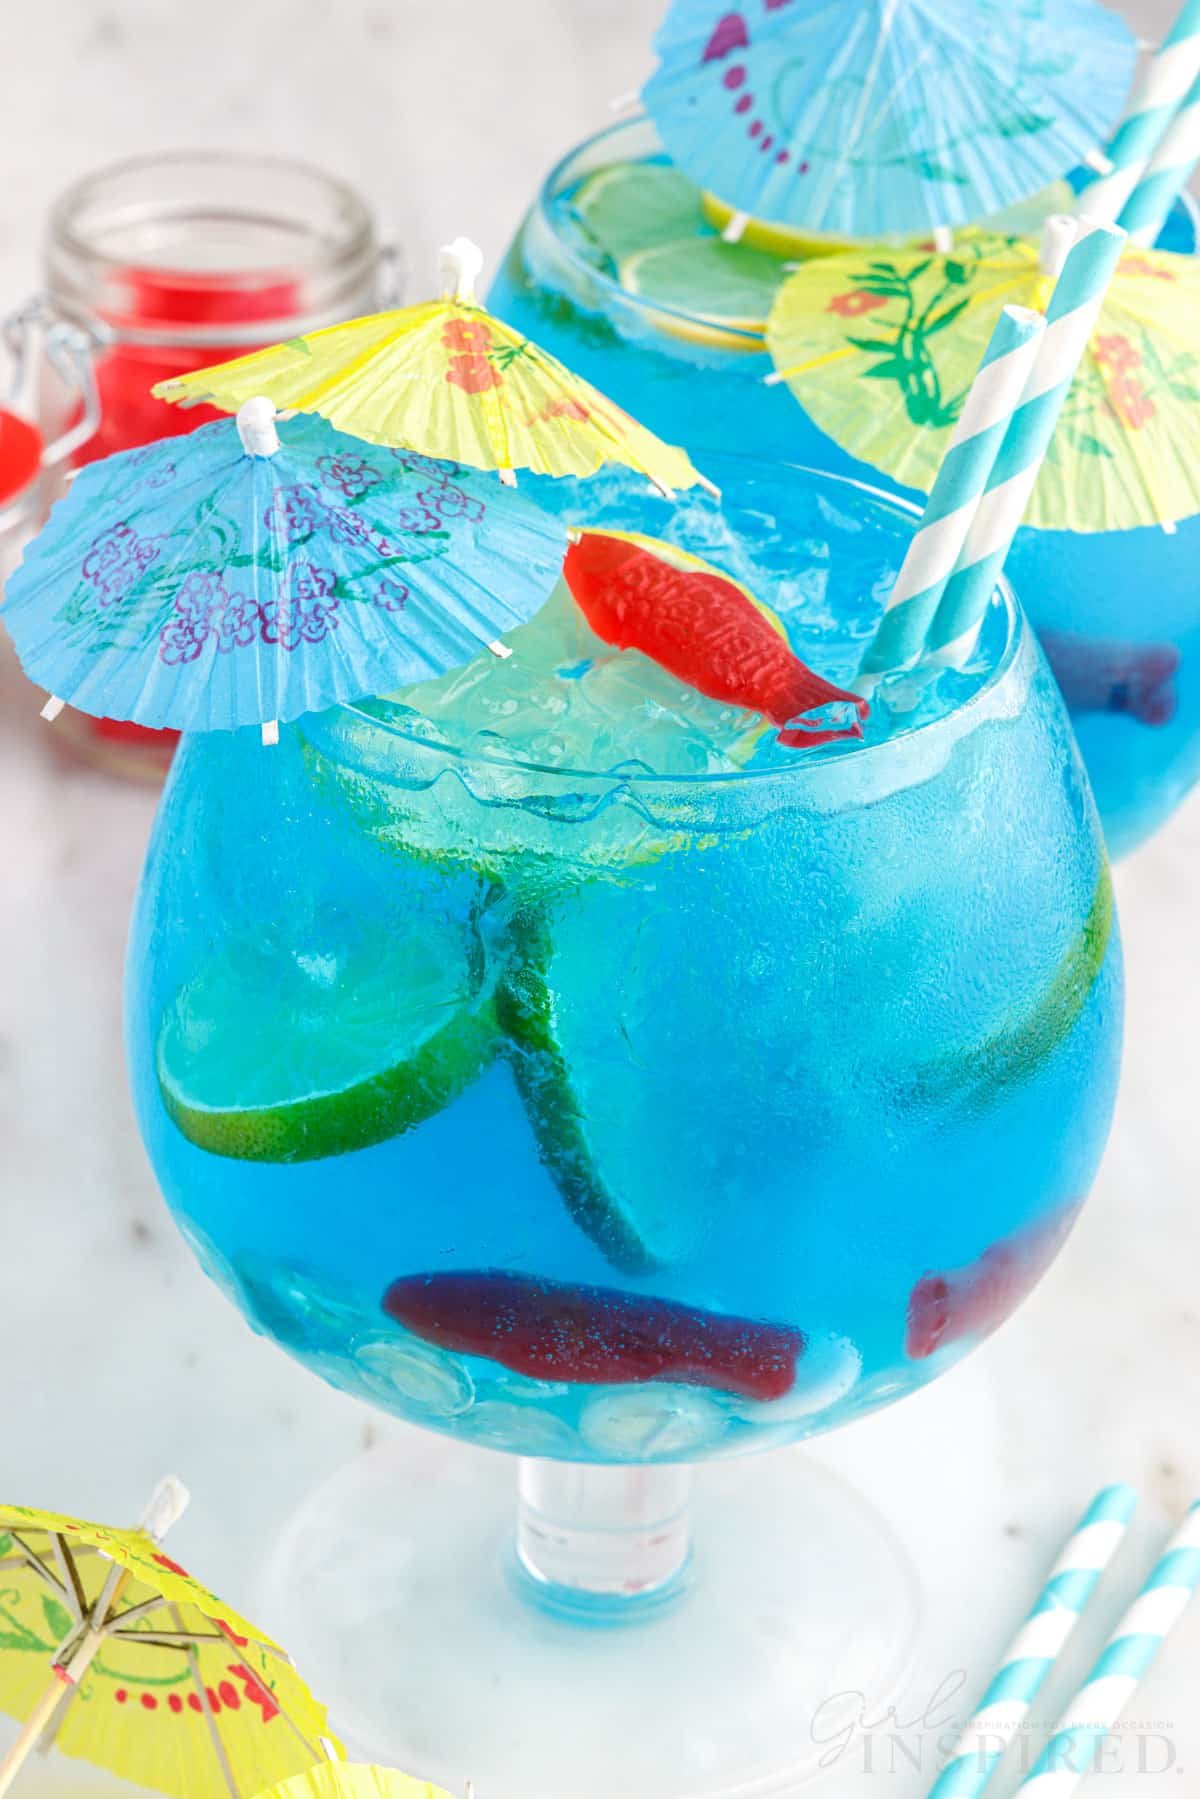 Fish Bowl drinks garnished with limes, Swedish fish, and drink umbrellas.